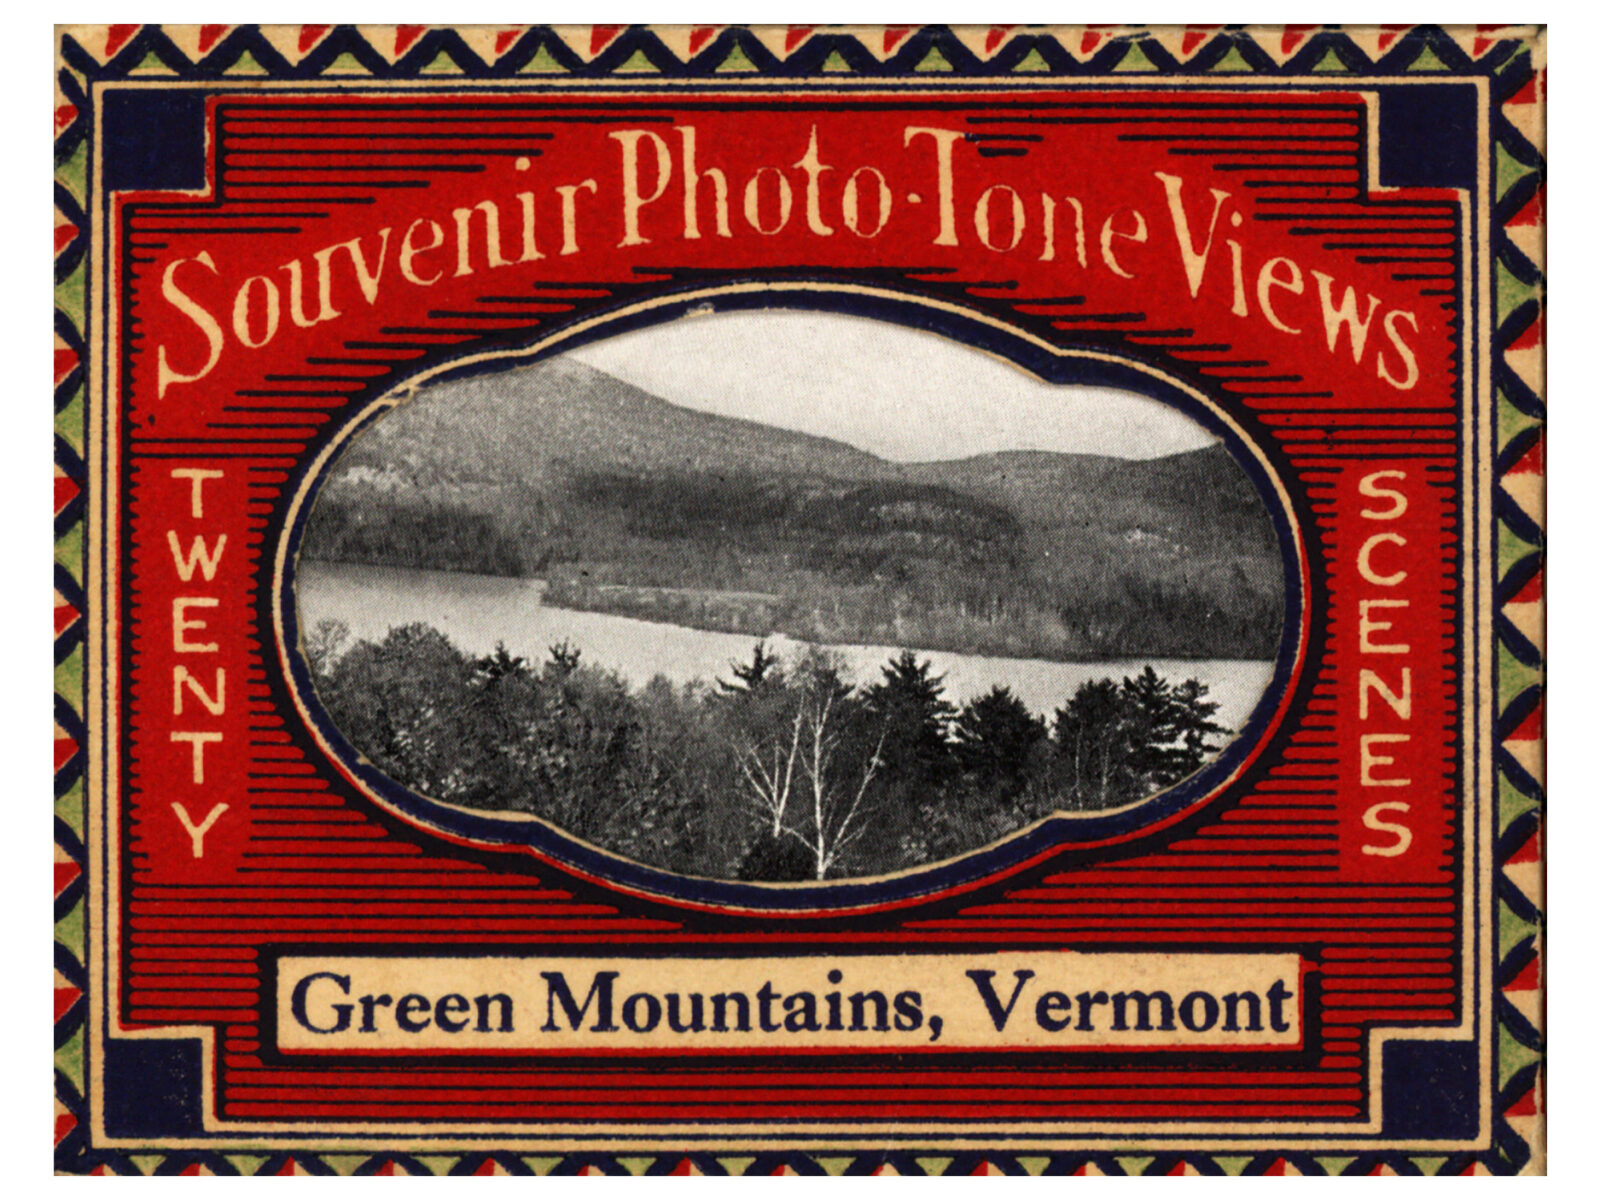 Portfolio wrapper with twenty scenes, one black and white picture of a river valley is visible.